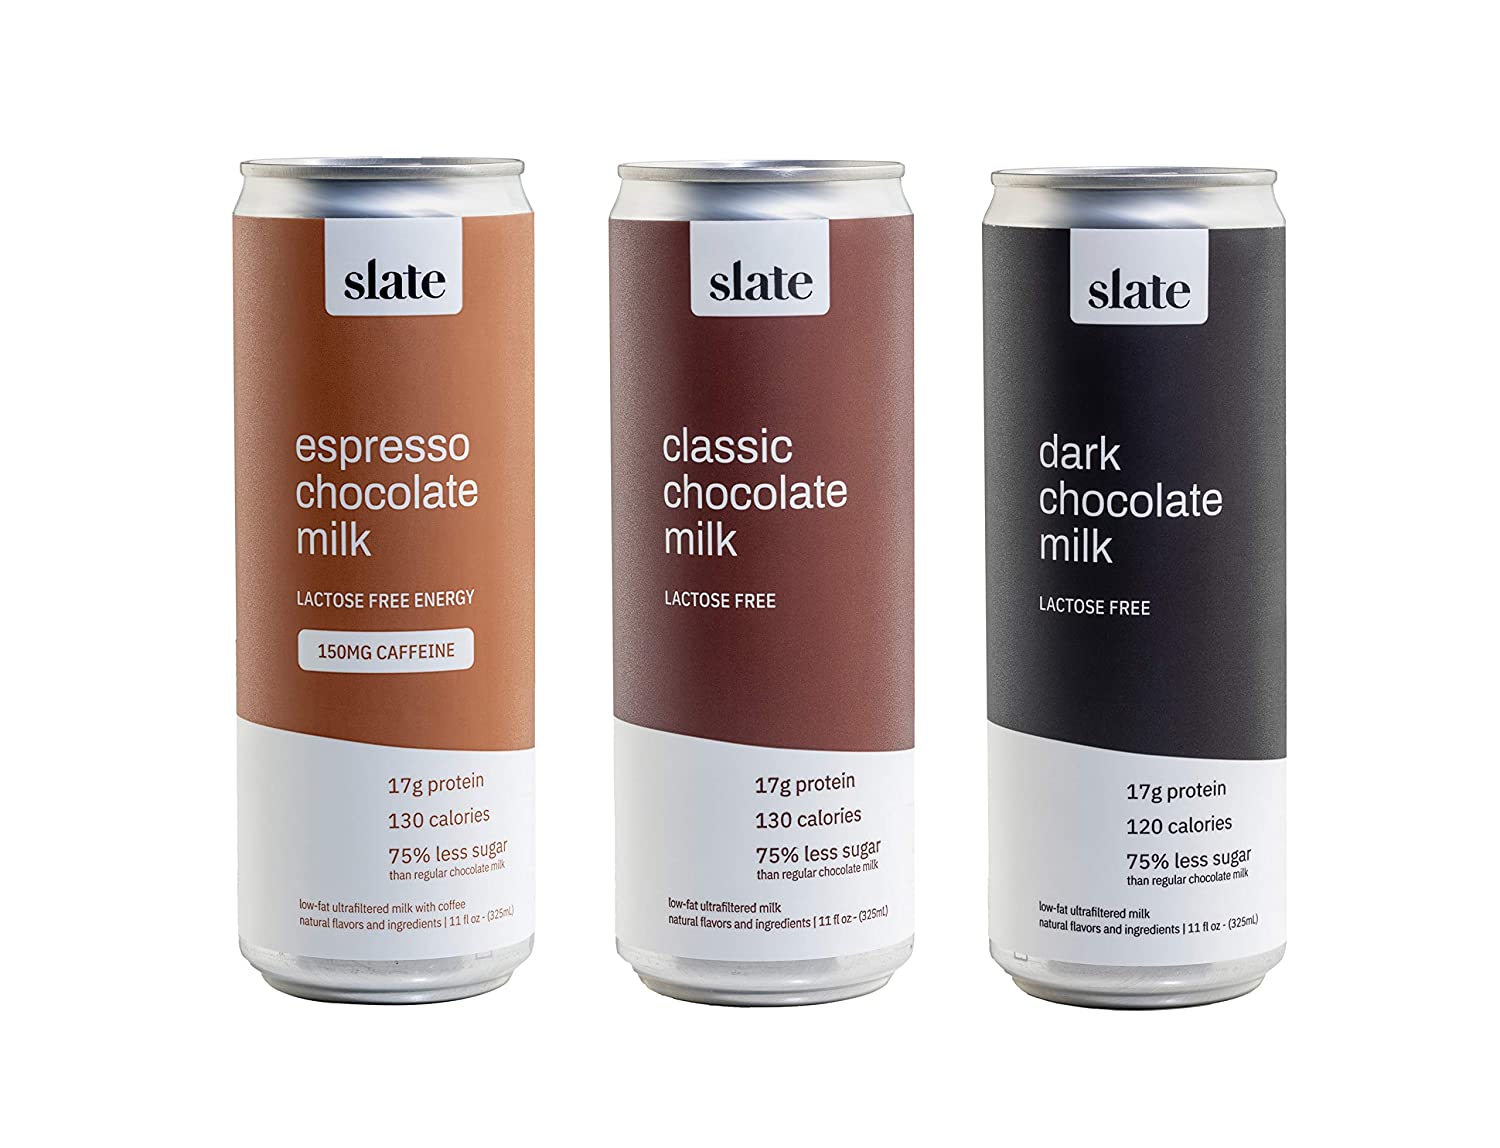 Slate Classic Chocolate Ultra-Filtered Milk Lactose Free - 11 oz can